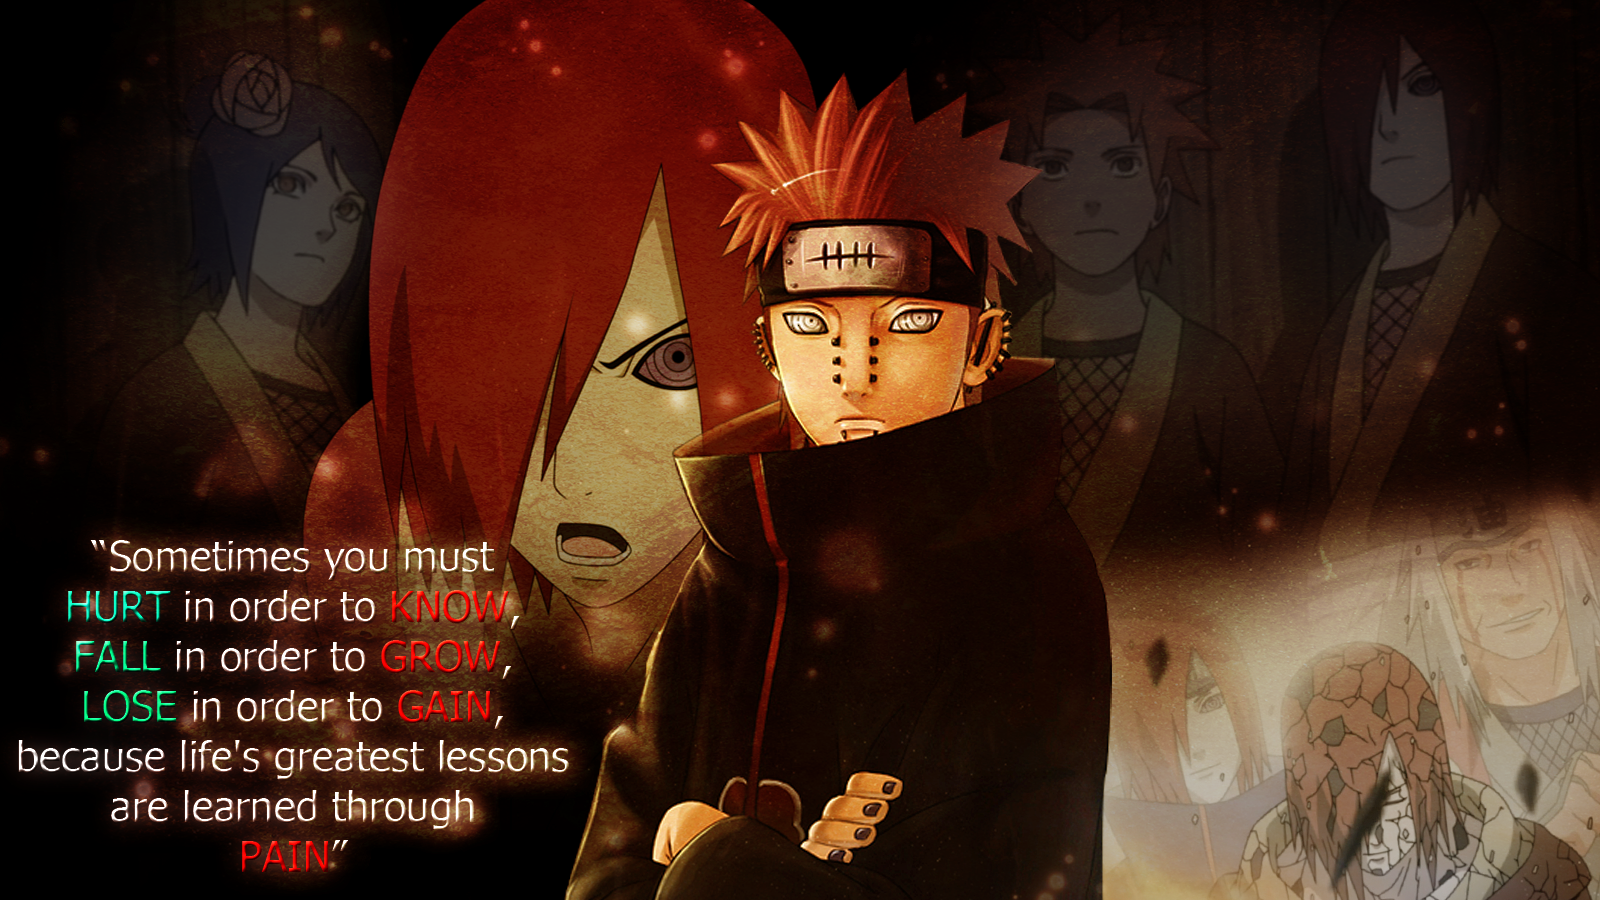 NagatoPains quote Life Lesson by Sasori640 on